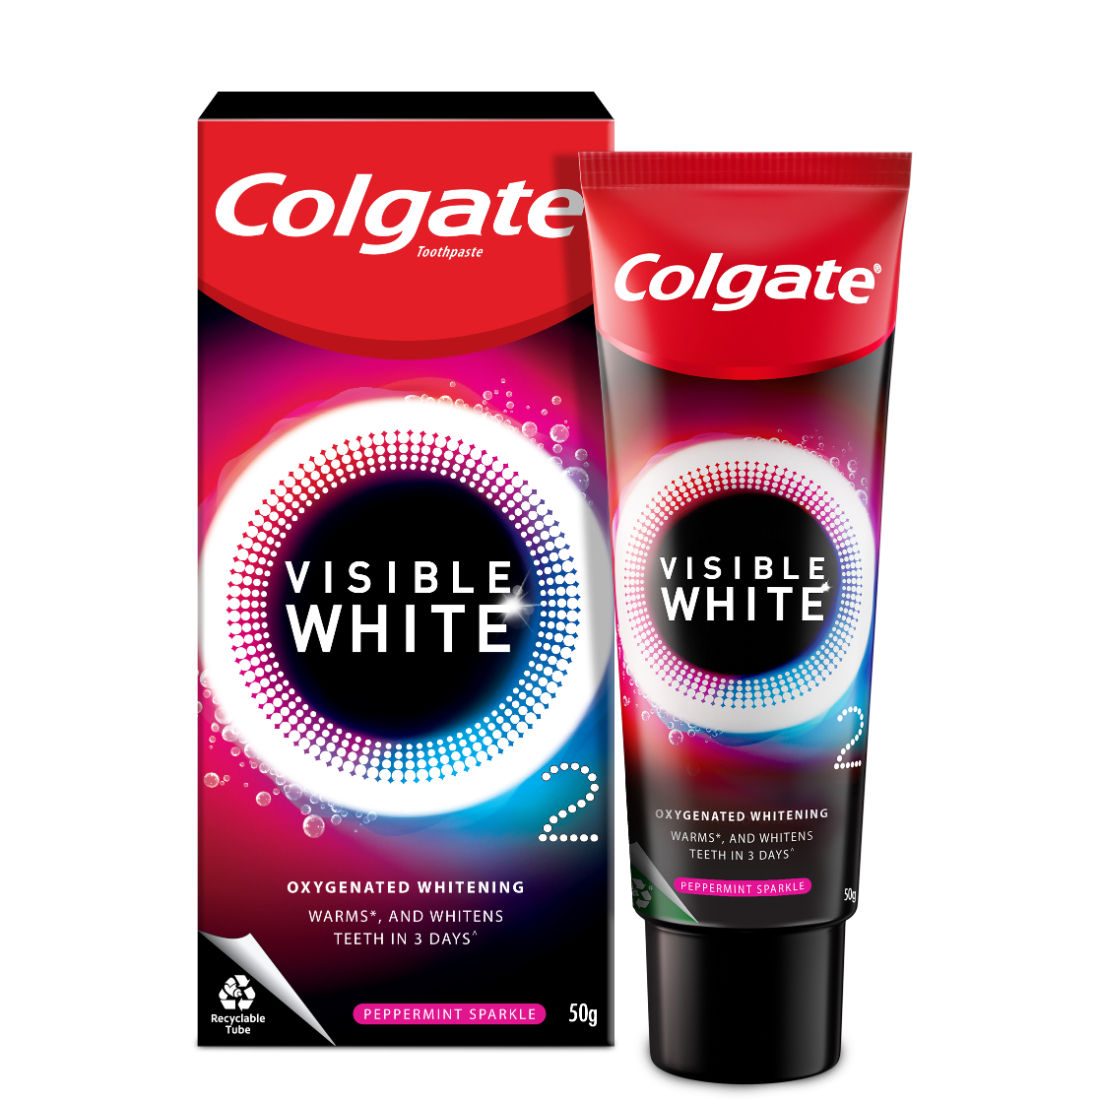 Buy Colgate Visible White O2 Whitening Peppermint Sparkle Toothpaste, 50 gm Online